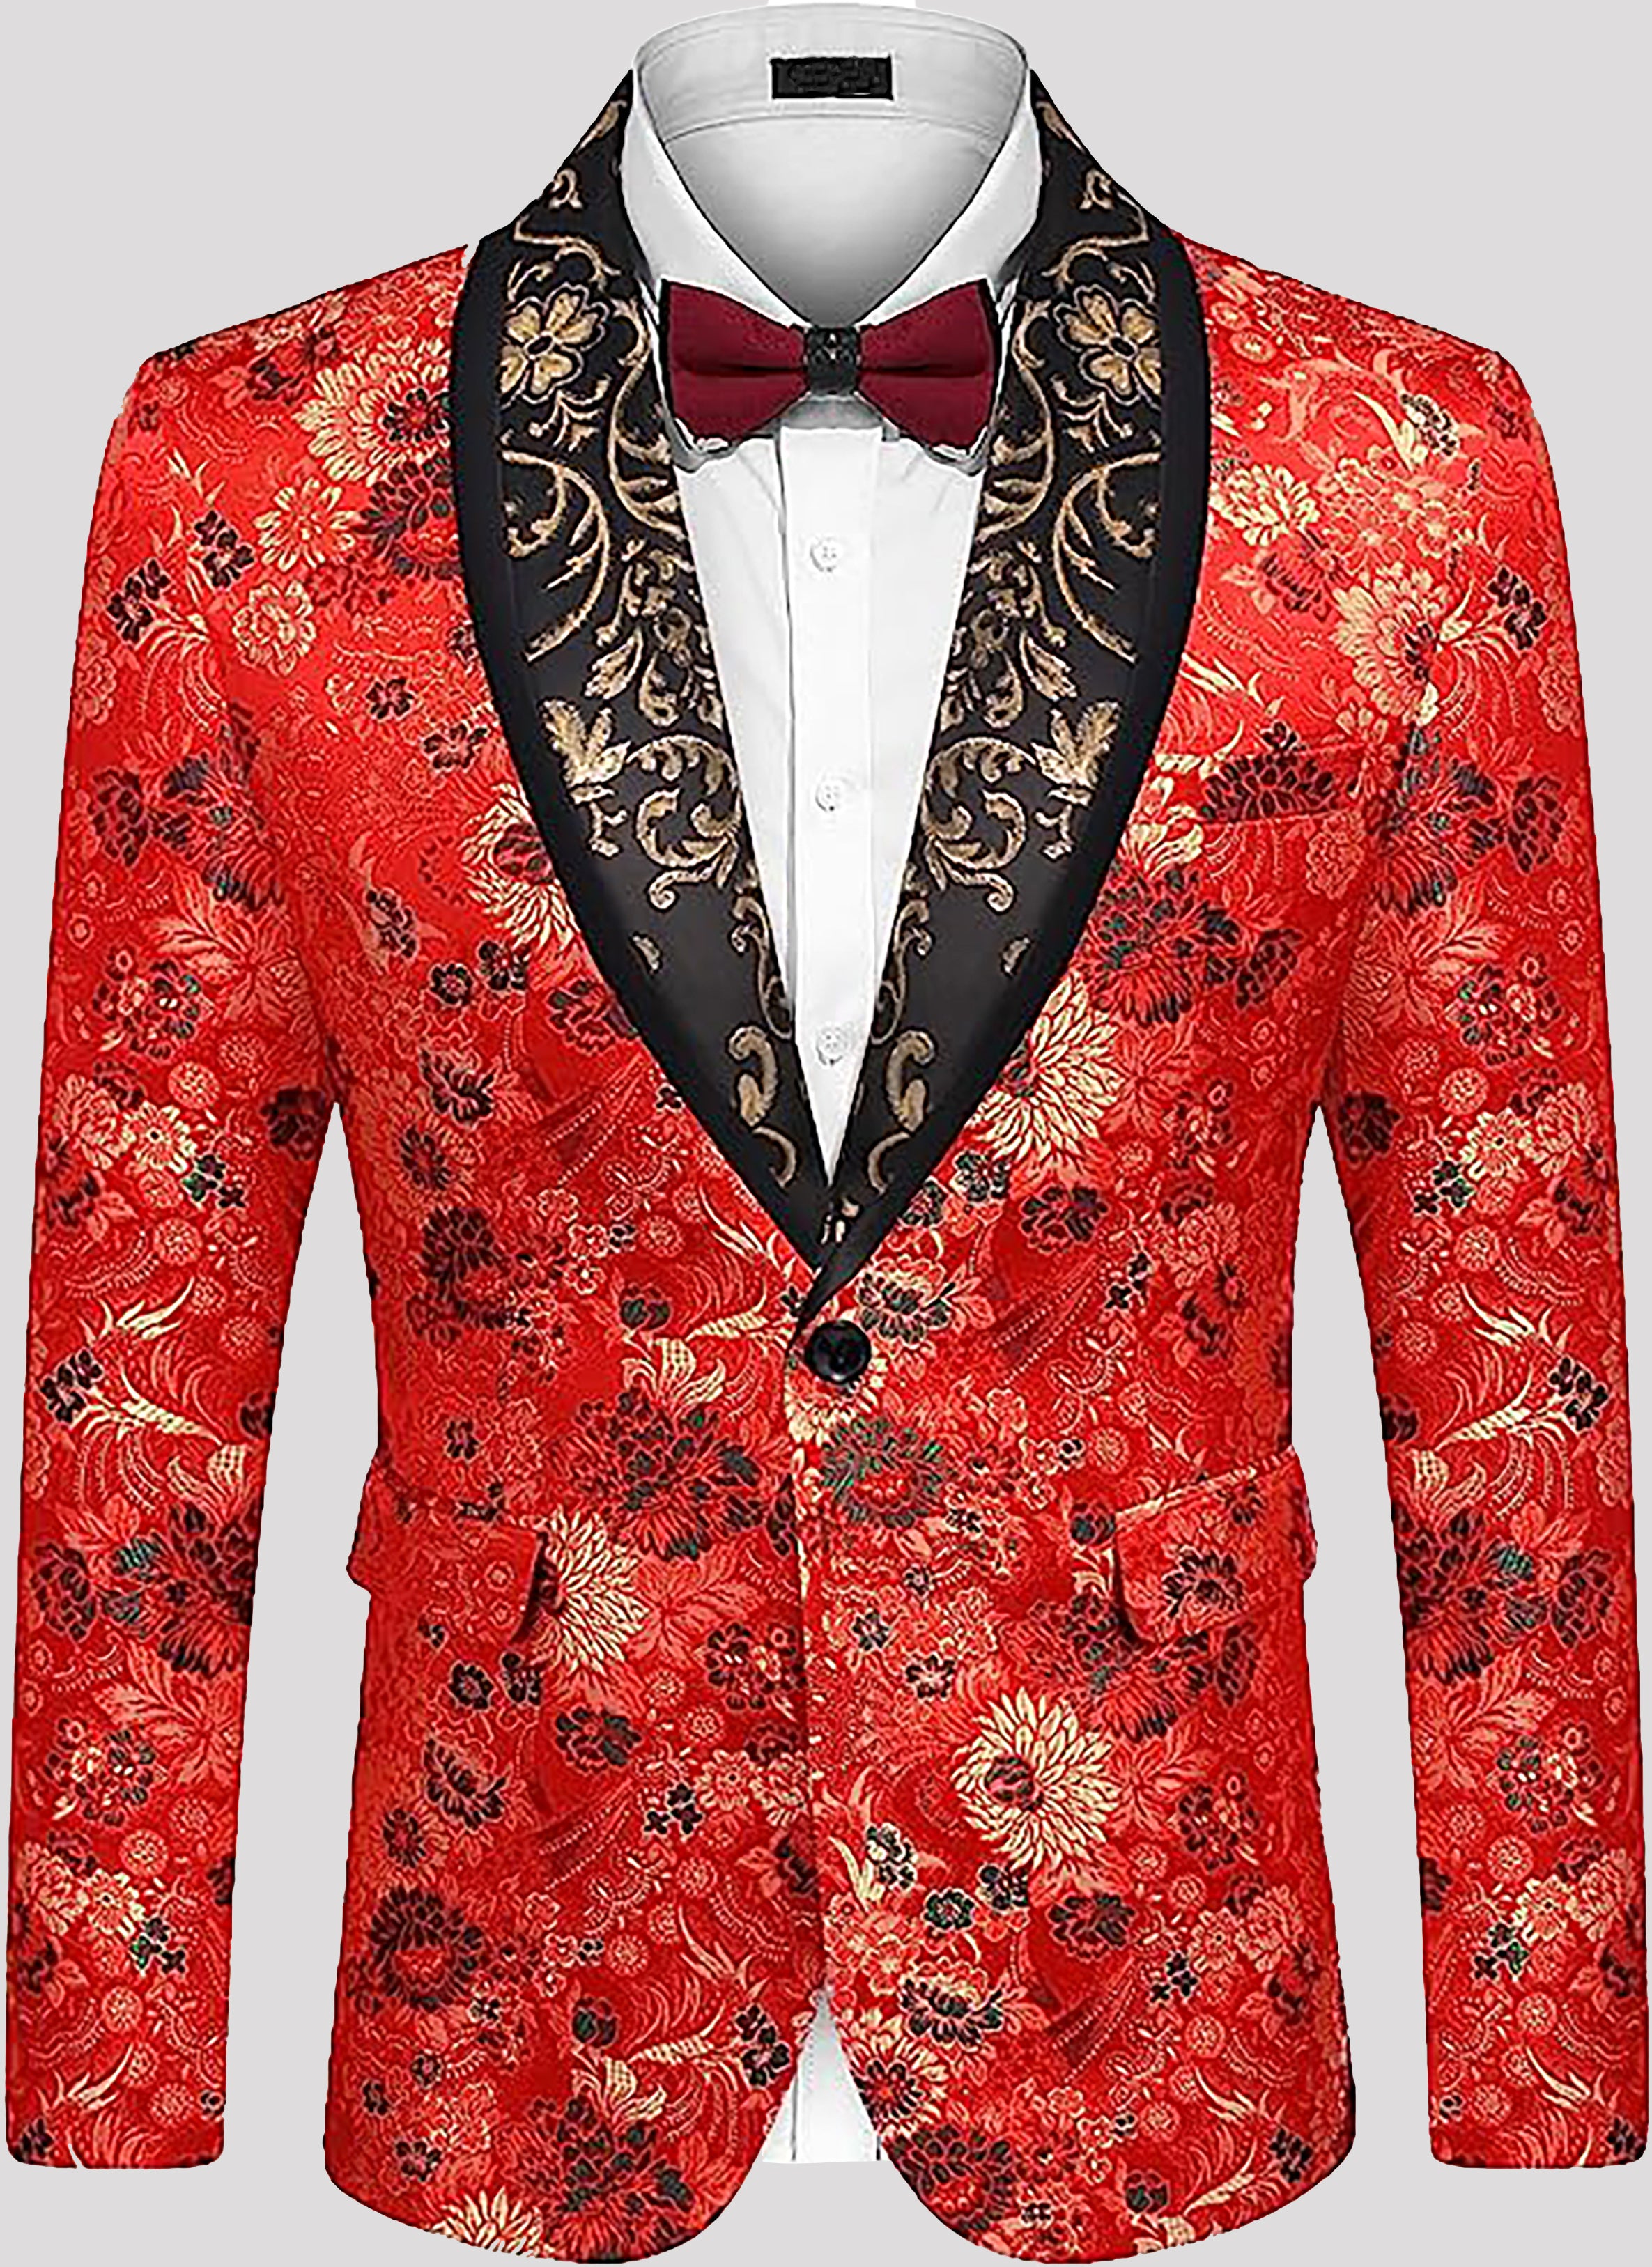 Men's Floral Tuxedo Jacket with Embroidered Blazer for Prom Parties - ENE TRENDS -custom designed-personalized- tailored-suits-near me-shirt-clothes-dress-amazon-top-luxury-fashion-men-women-kids-streetwear-IG-best